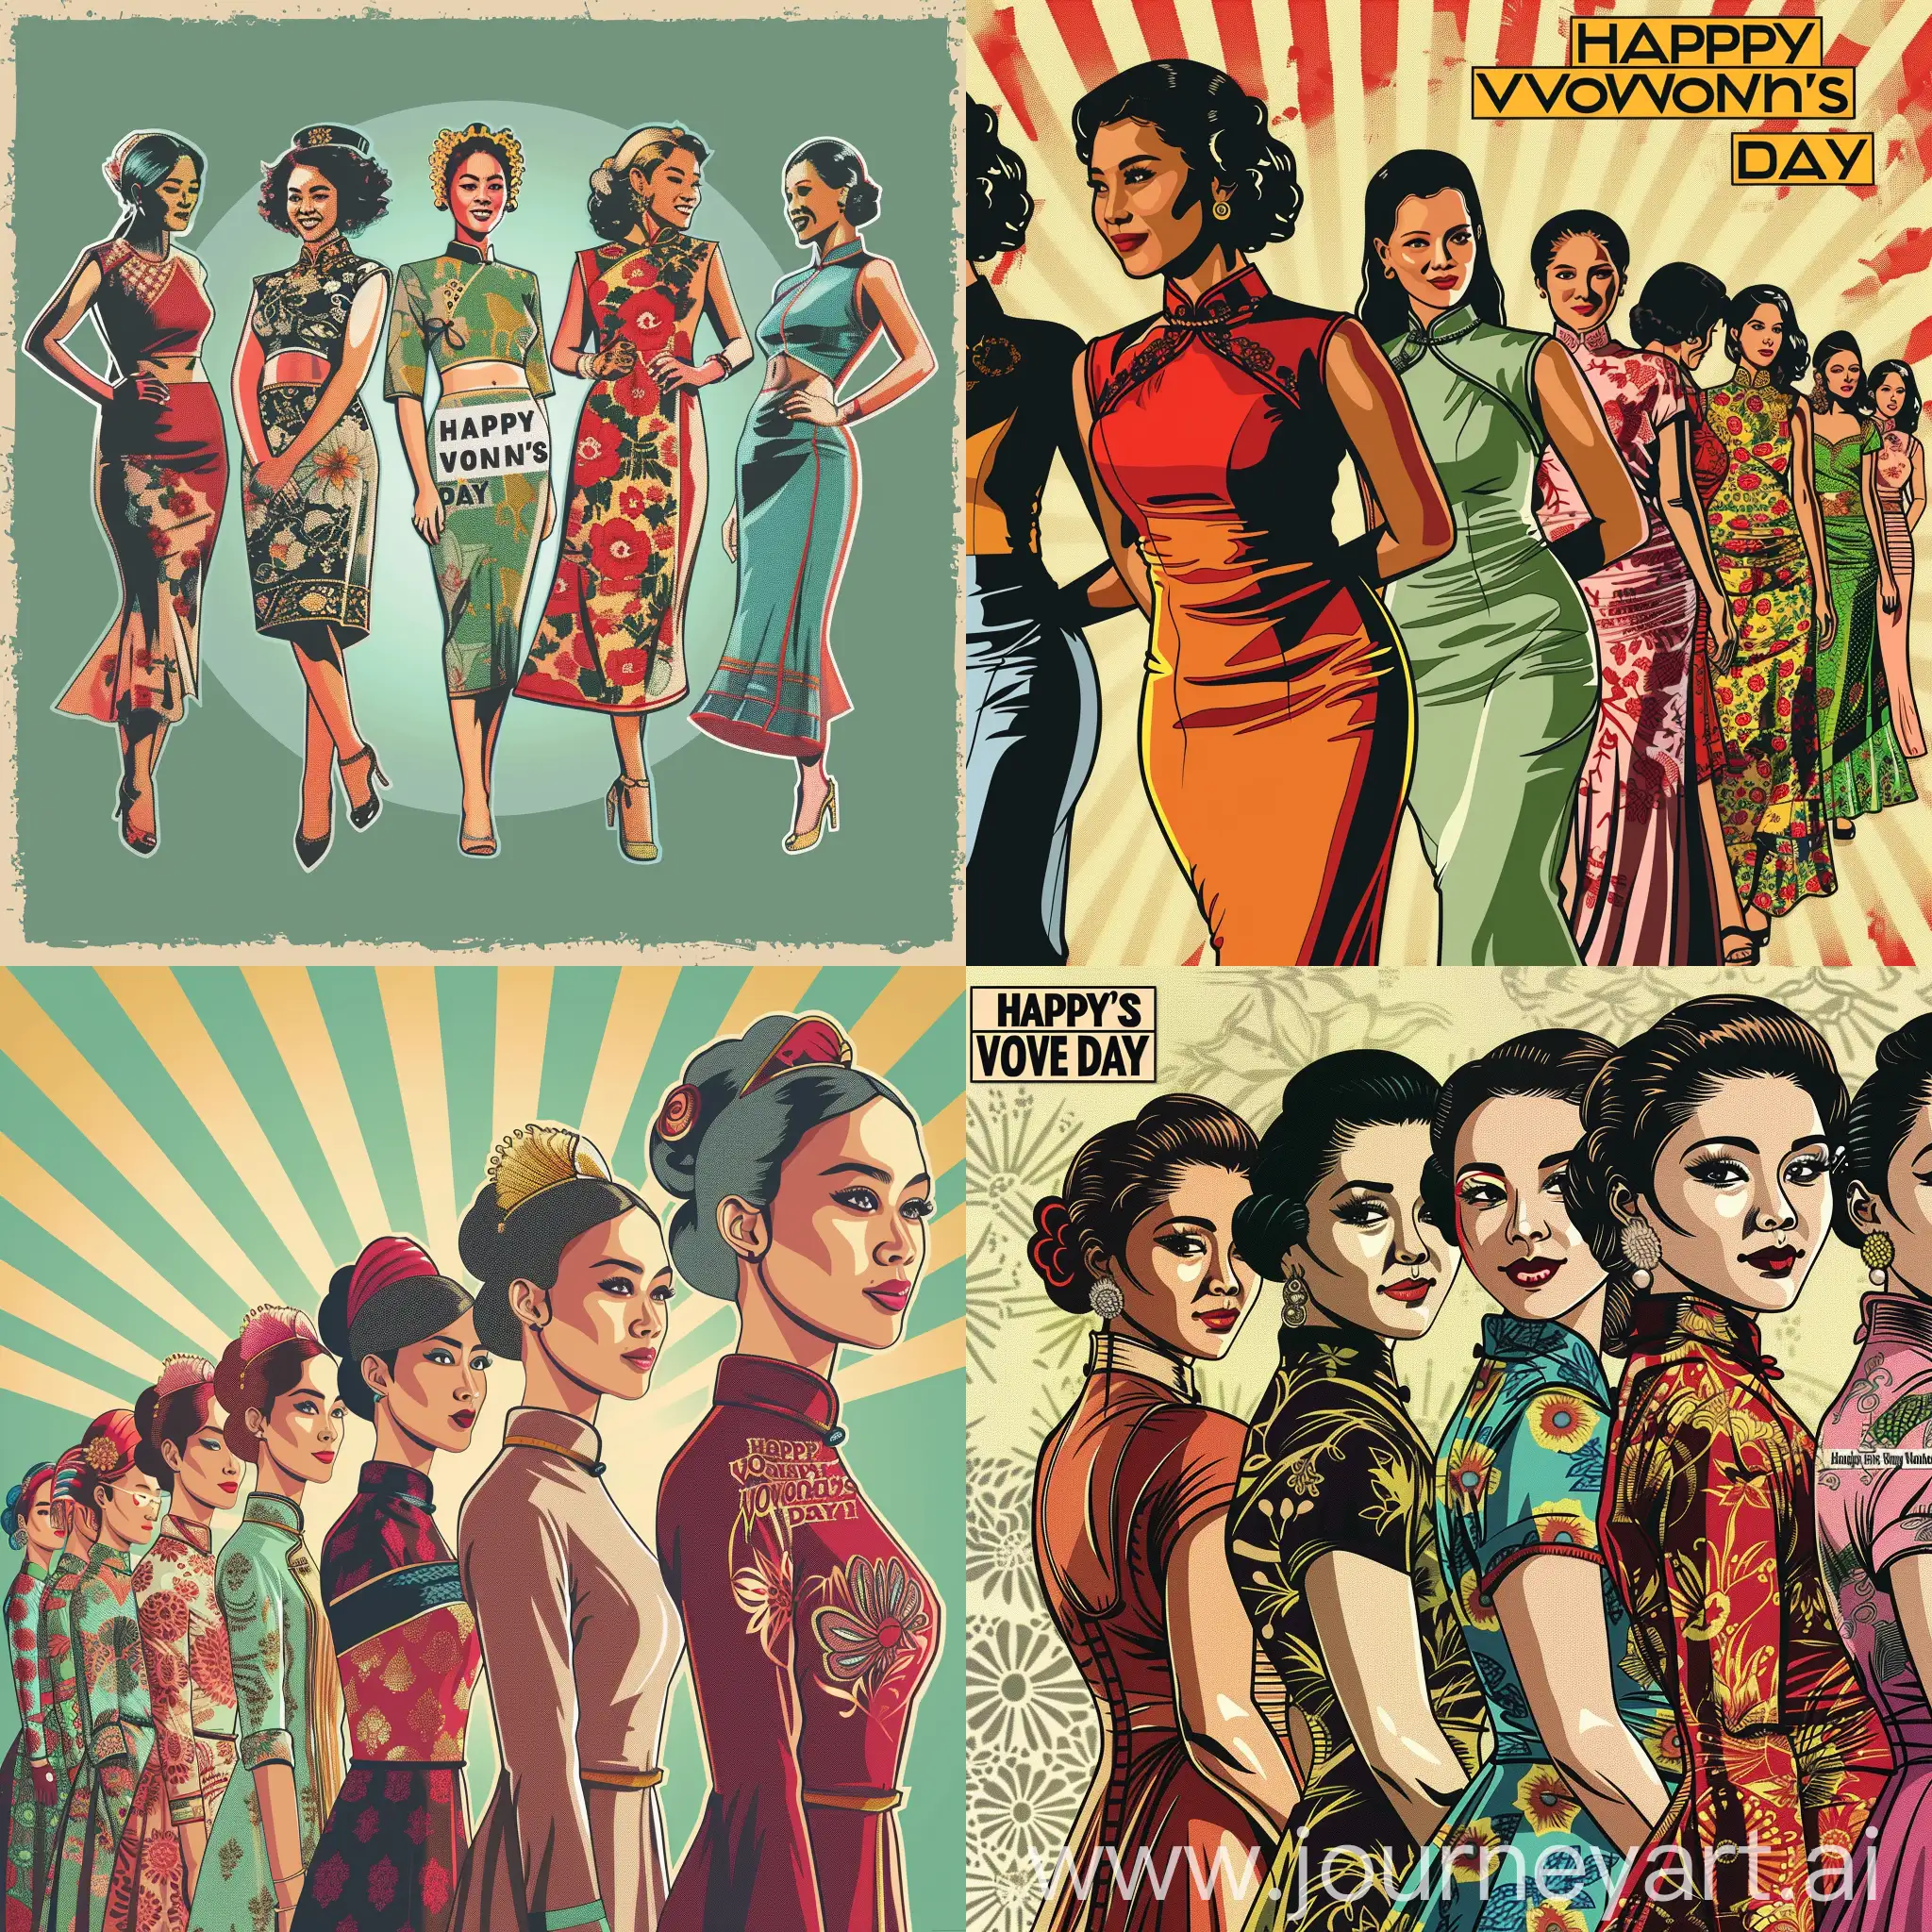 With the exact words 'Happy Women's Day 2024' in a suitable font and placement to create an attractive sticker, generate an illustration in the style of a 1950s advertising poster or Roy Lichtenstein style depicting powerful malaysian womens superheroic. in a row a stunning malaysian women malay chinese and indians wearing elegant loosely traditional dress. The scene should convey a dynamic and self-confident impression